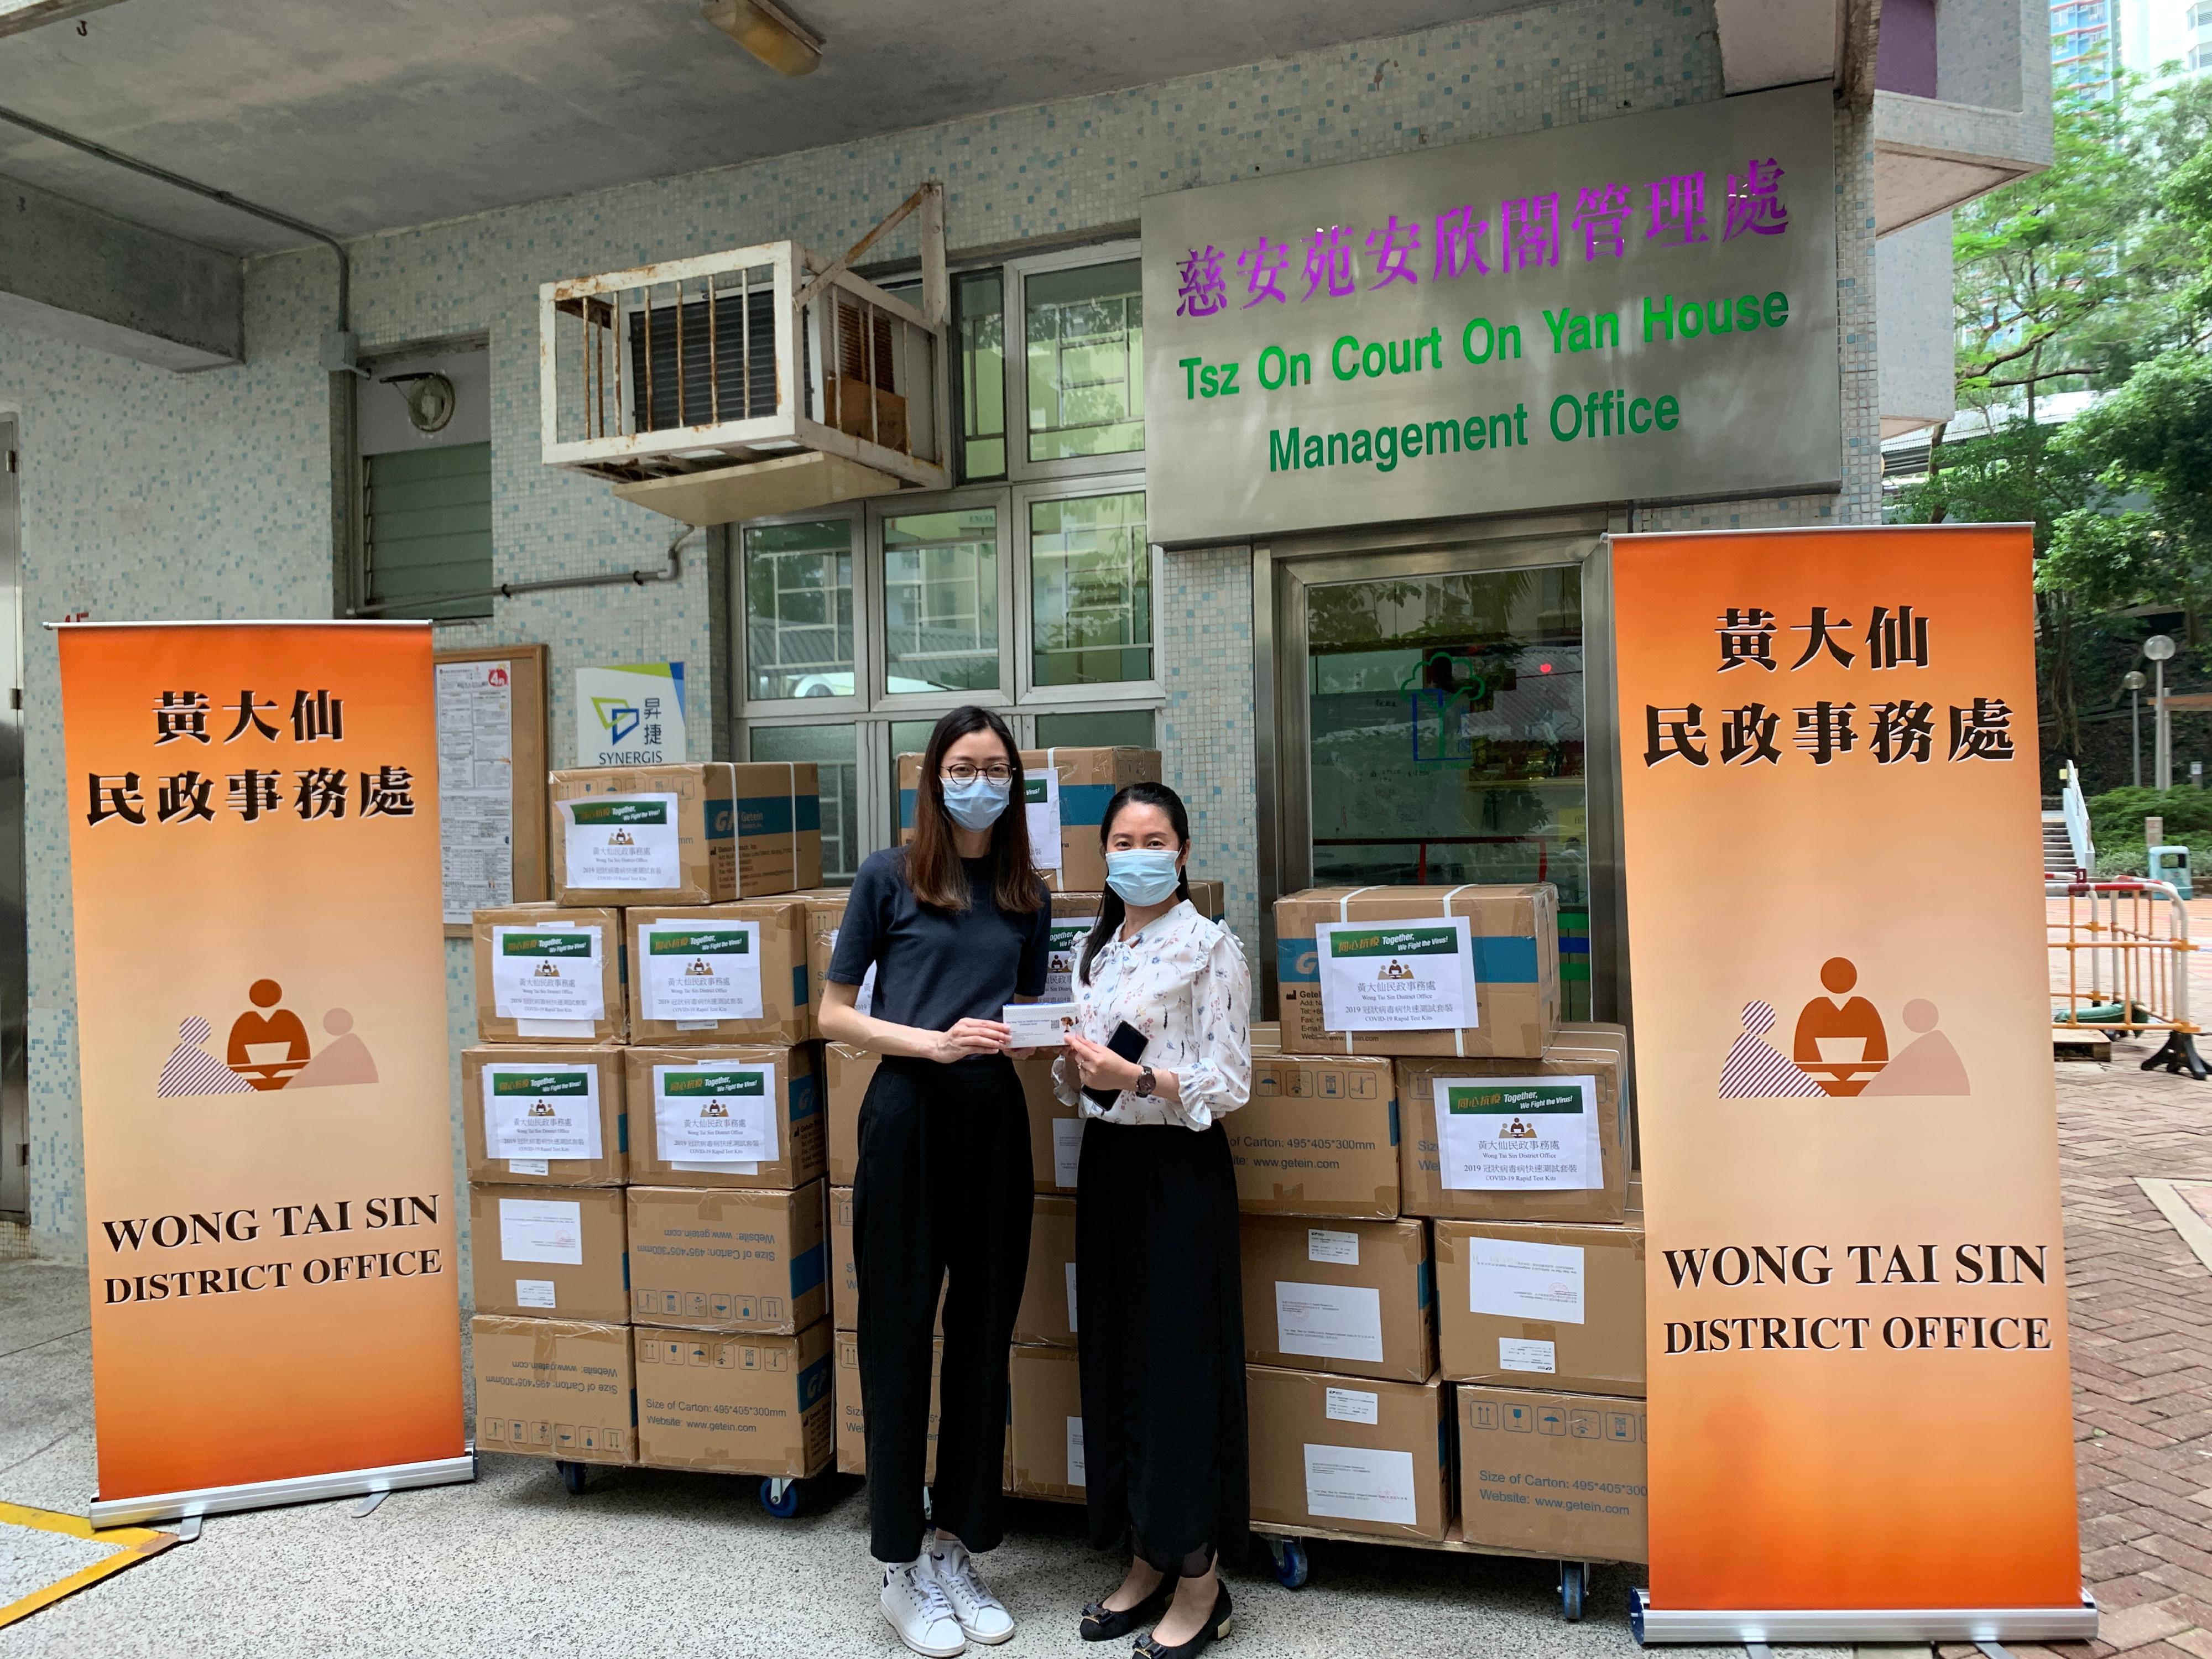 The Wong Tai Sin District Office today (June 20) distributed COVID-19 rapid test kits to households, cleansing workers and property management staff living and working in Tsz On Court for voluntary testing through the property management company.